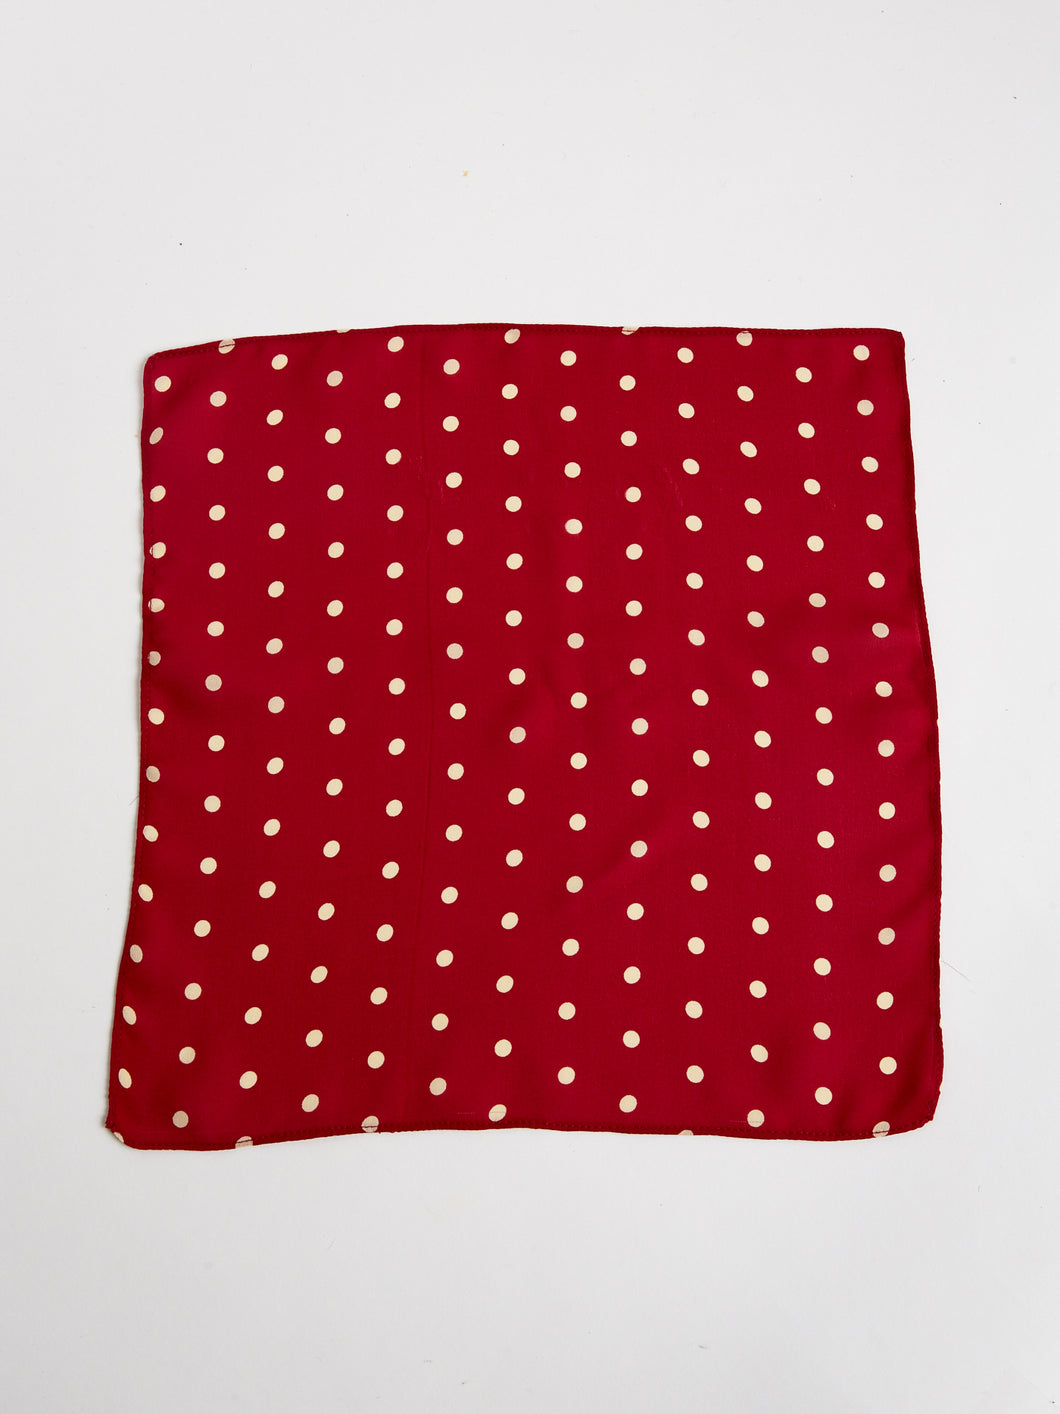 The Arc Petite Scarf in Red and White Microdot